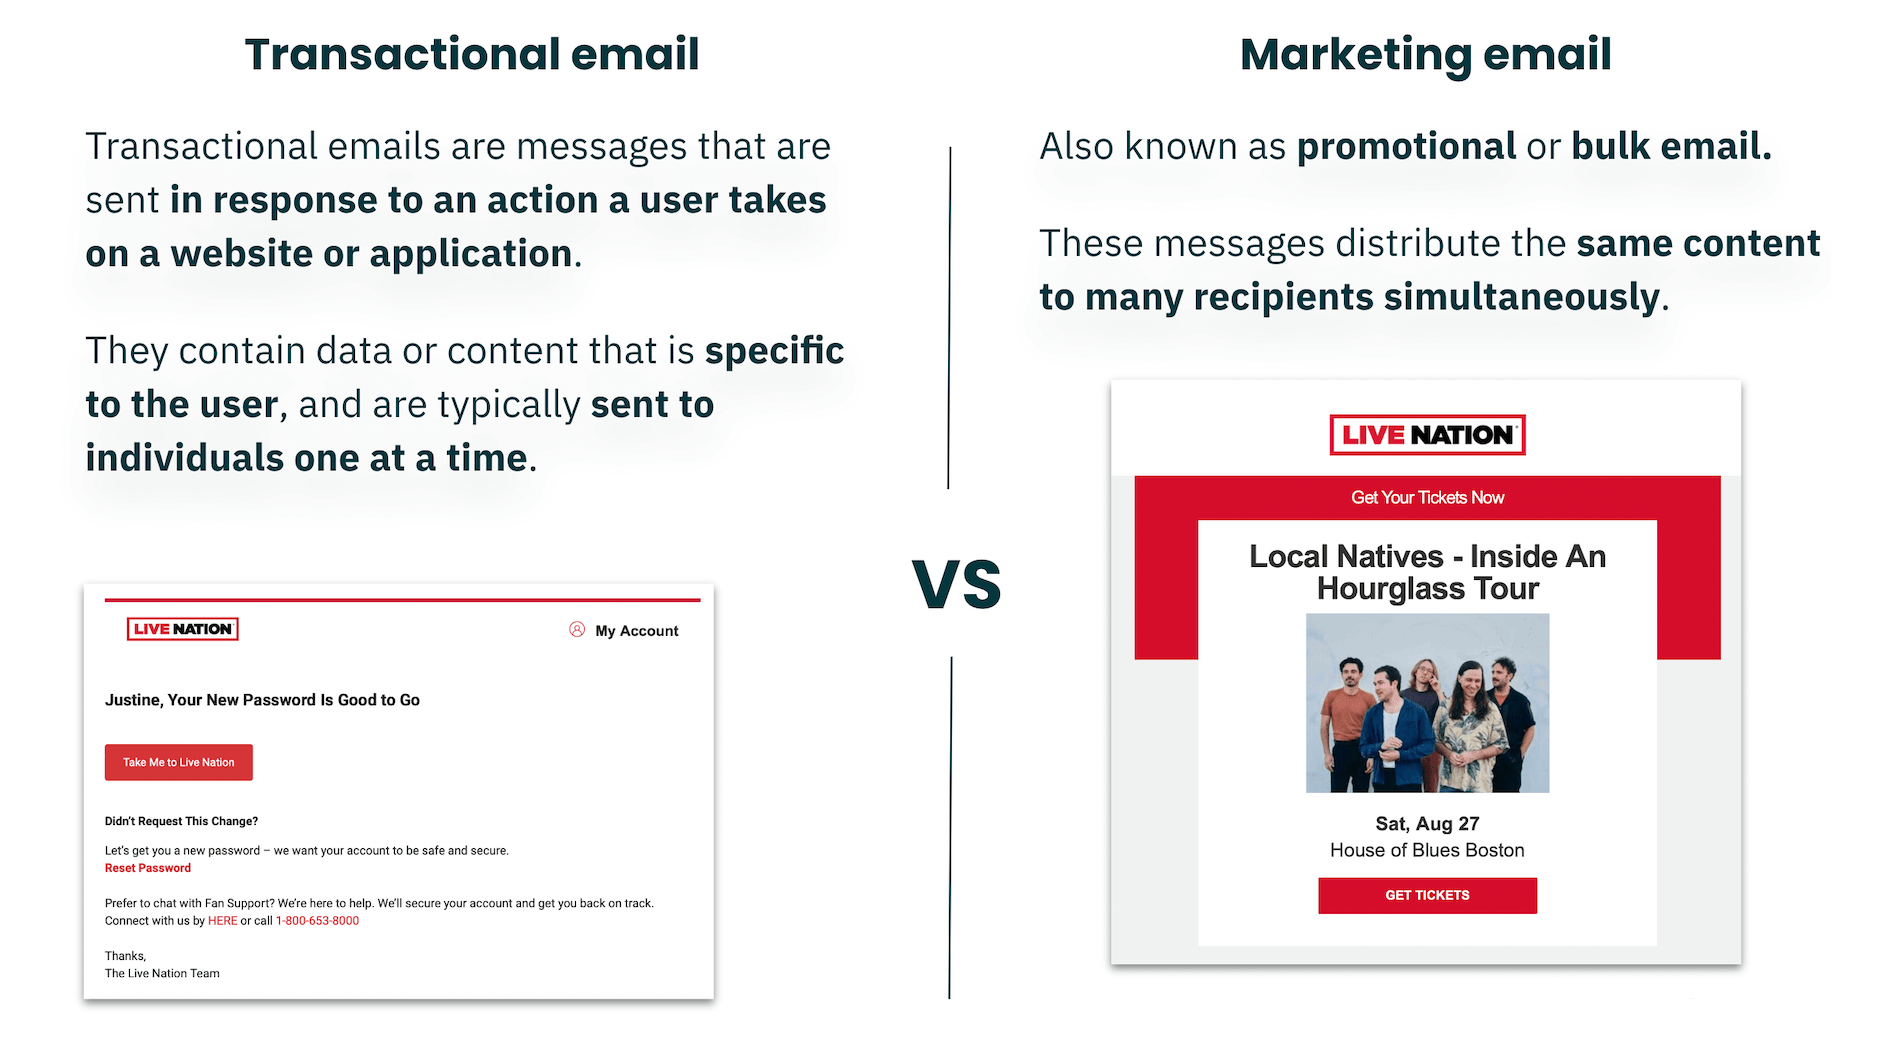 the difference between transactional and marketing emails